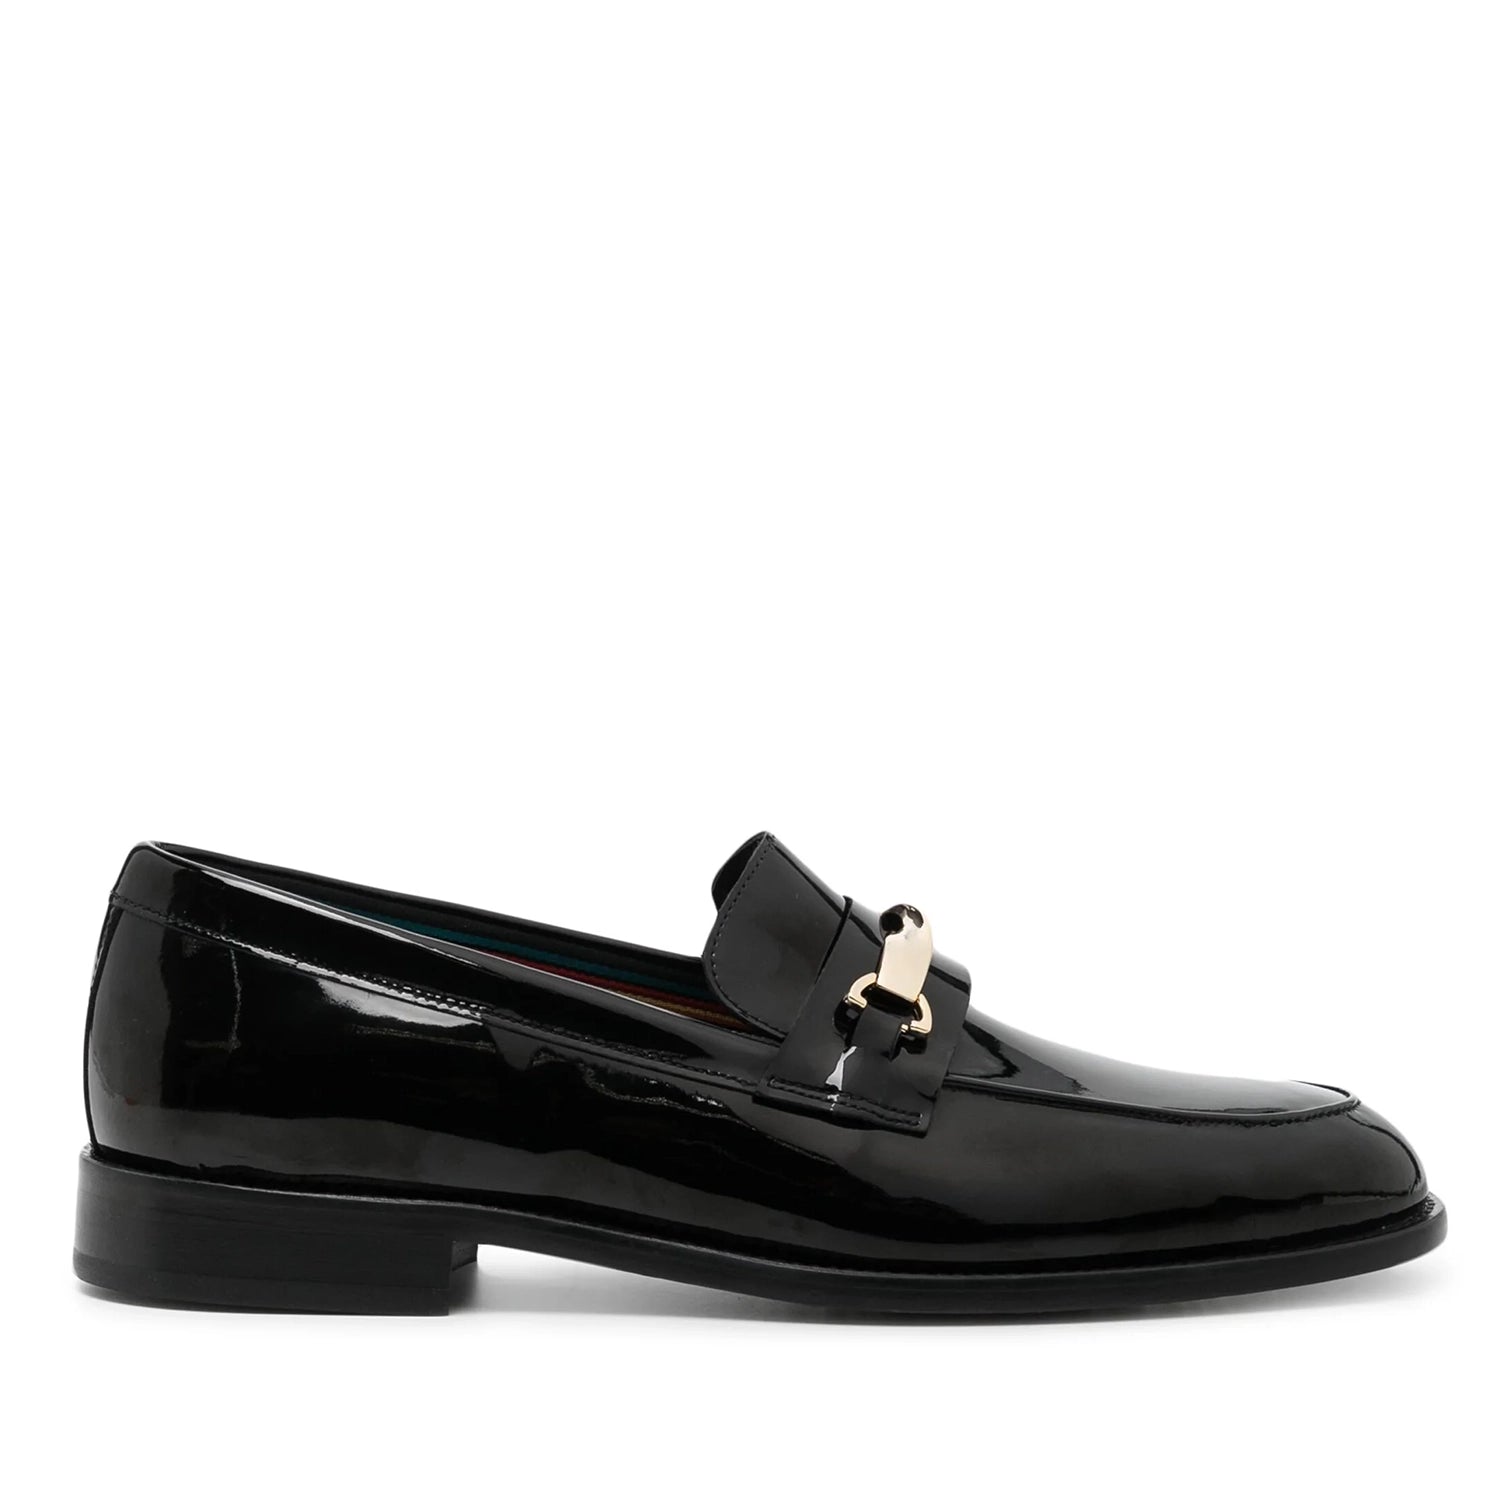 Black Patent Leather Party Wear Loafers